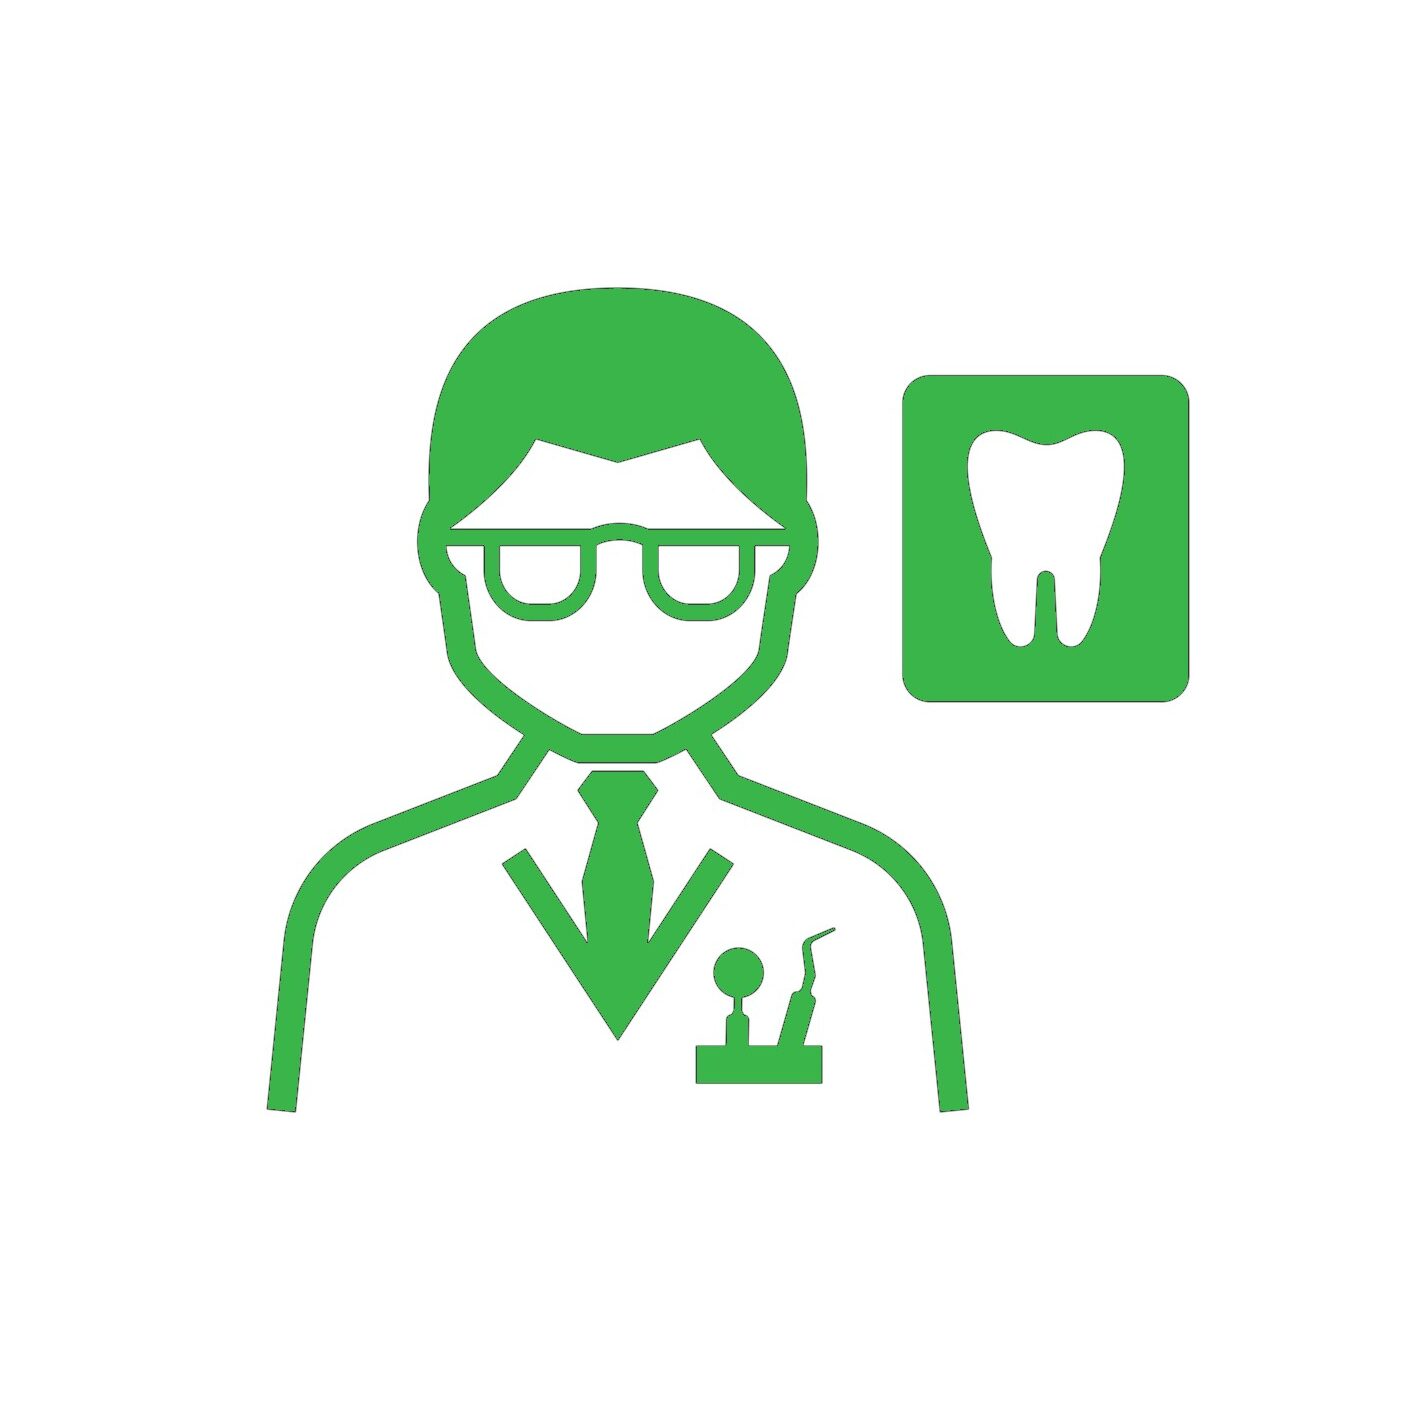 Tooth Picture and Dentist Icon